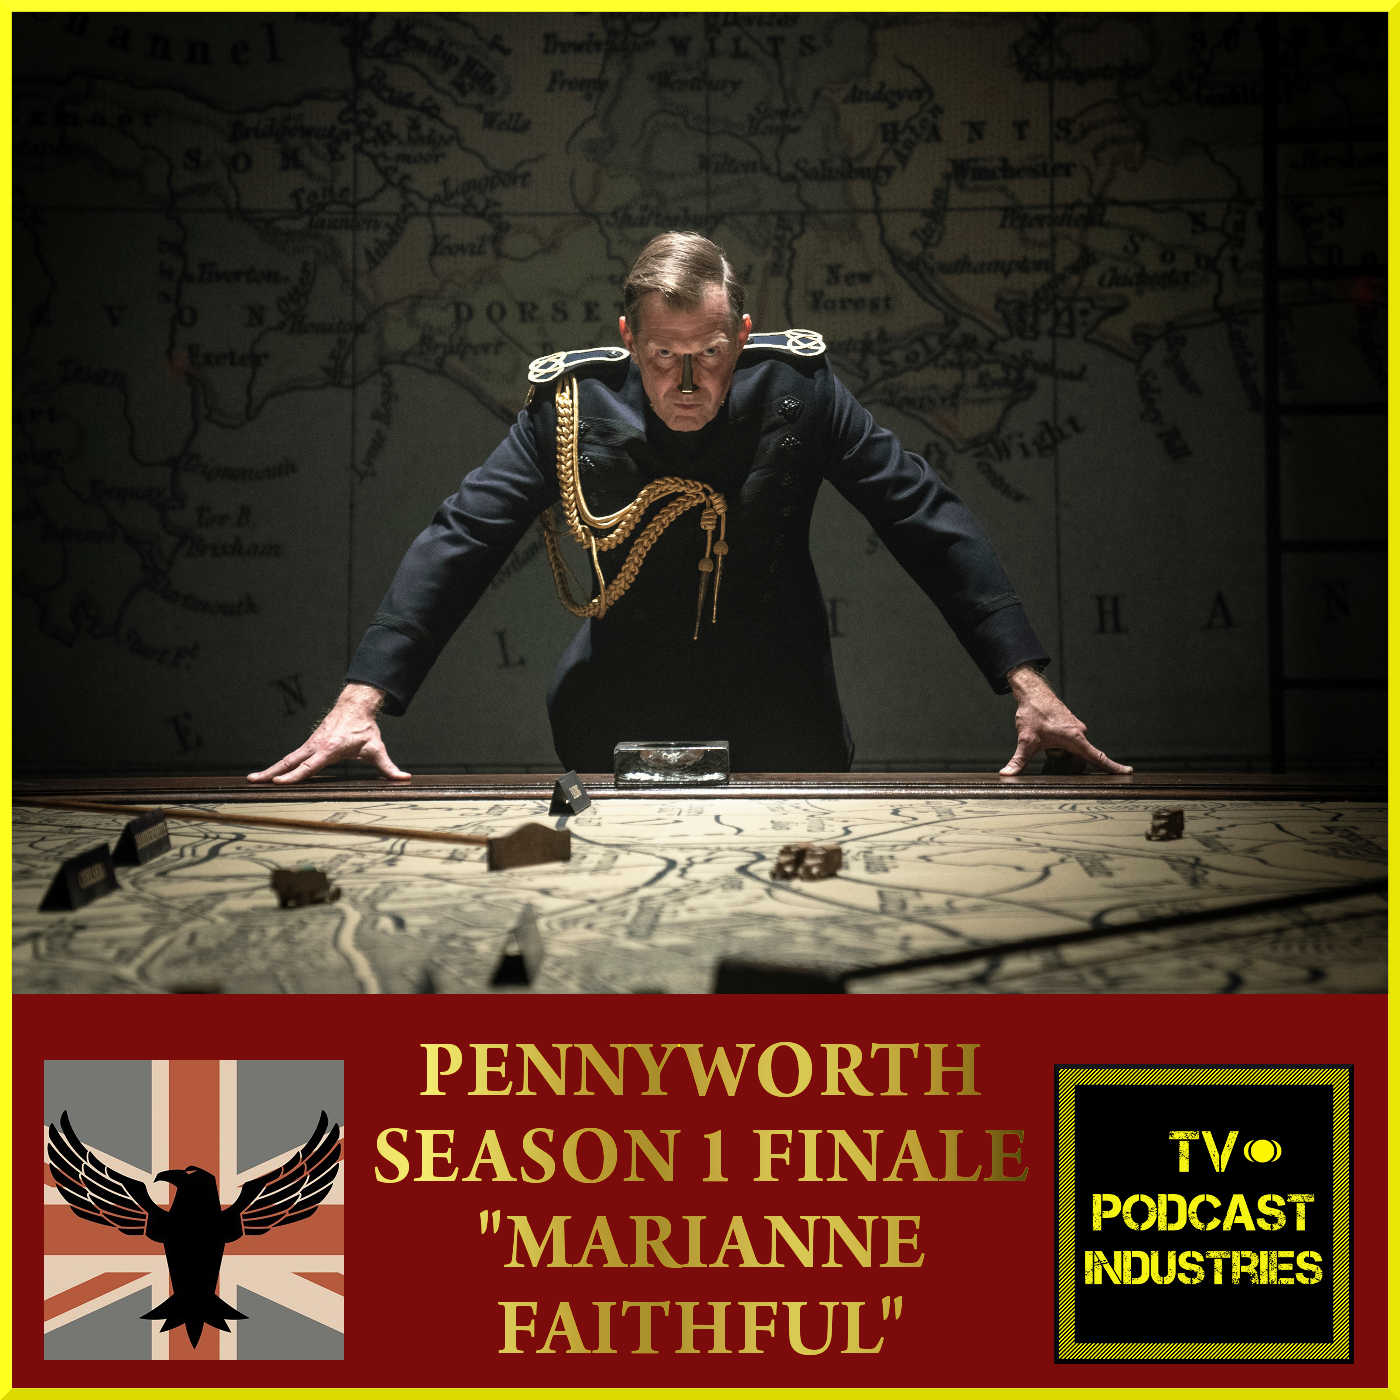 Pennyworth Finale Podcast Episode 10 "Marianne Faithful" by TV Podcast Industries